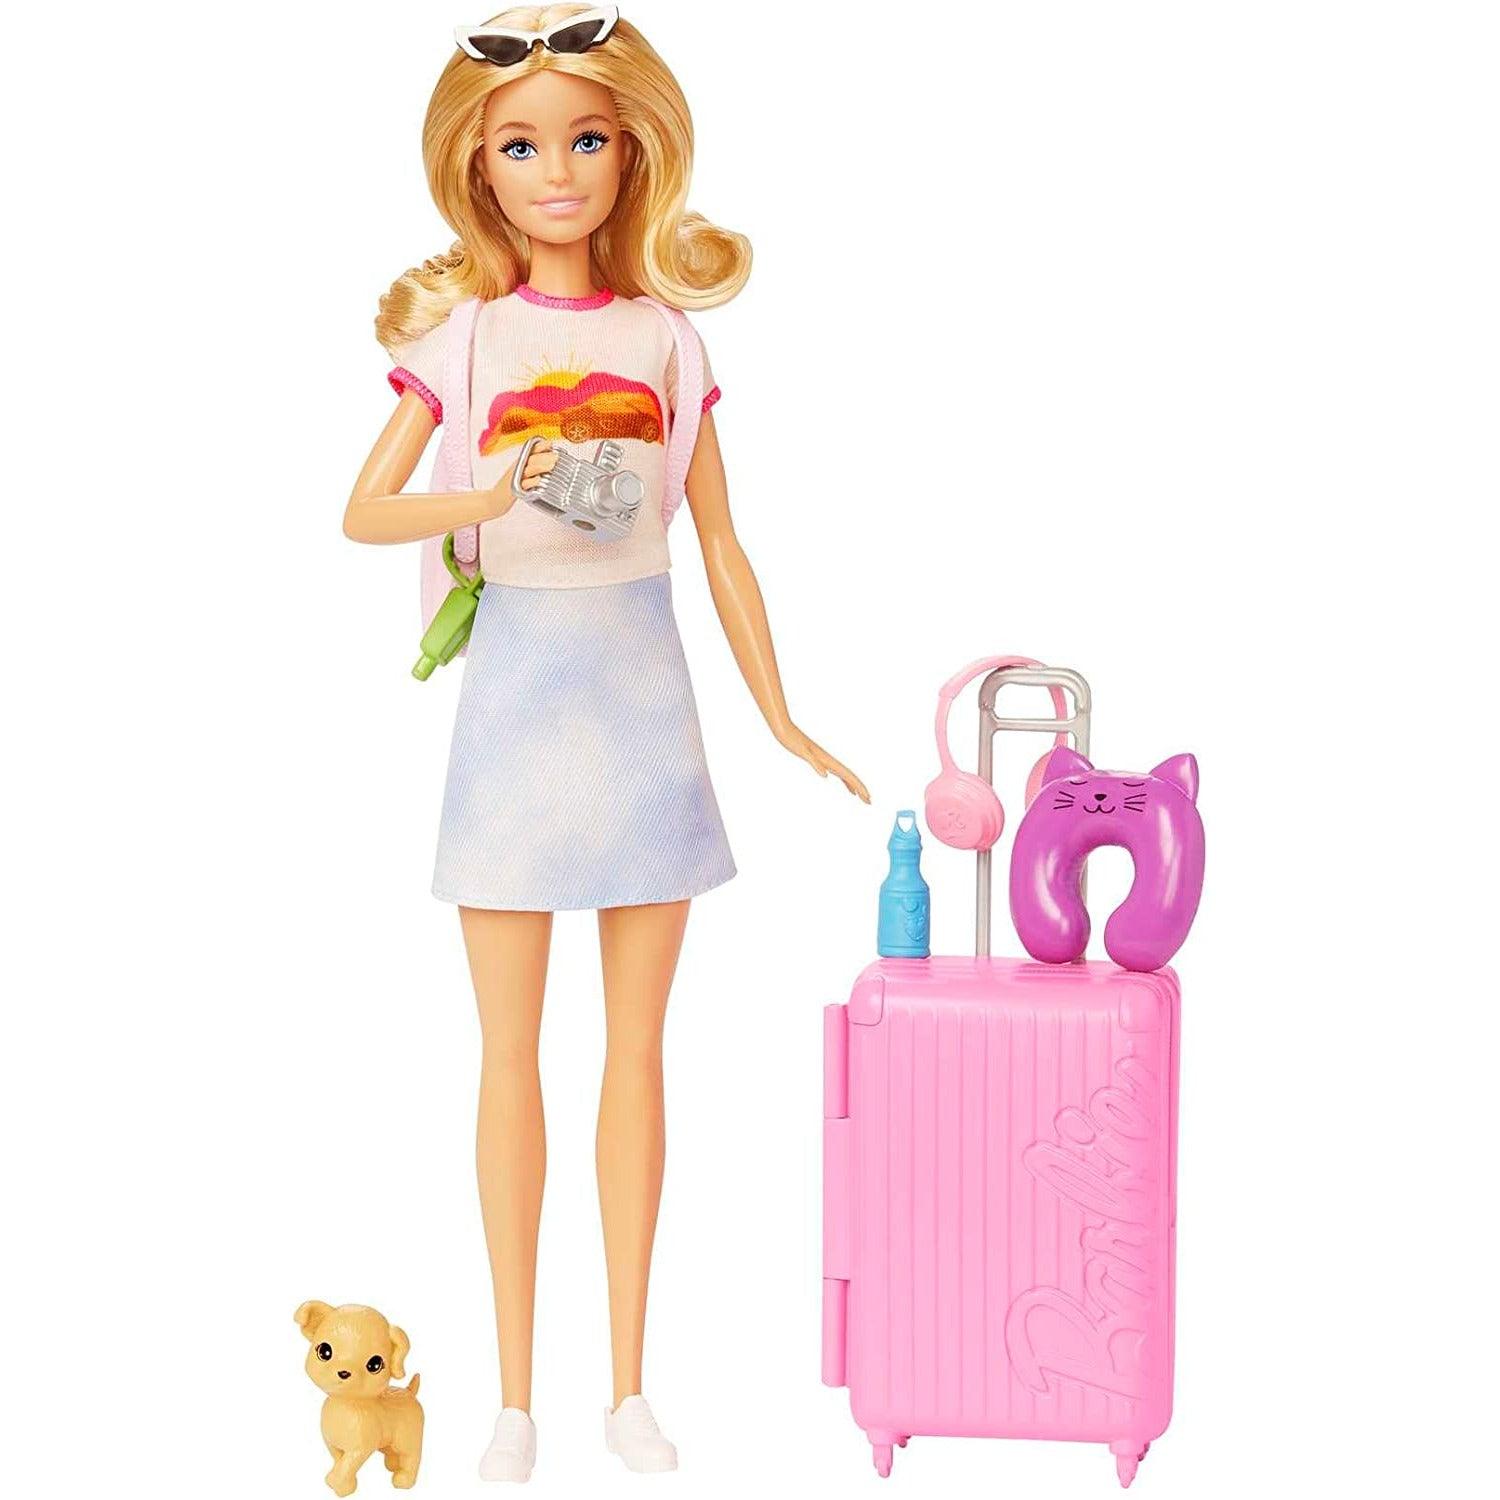 Barbie Doll & Accessories, Travel Set with Puppy, Malibu Doll with Blonde Hair